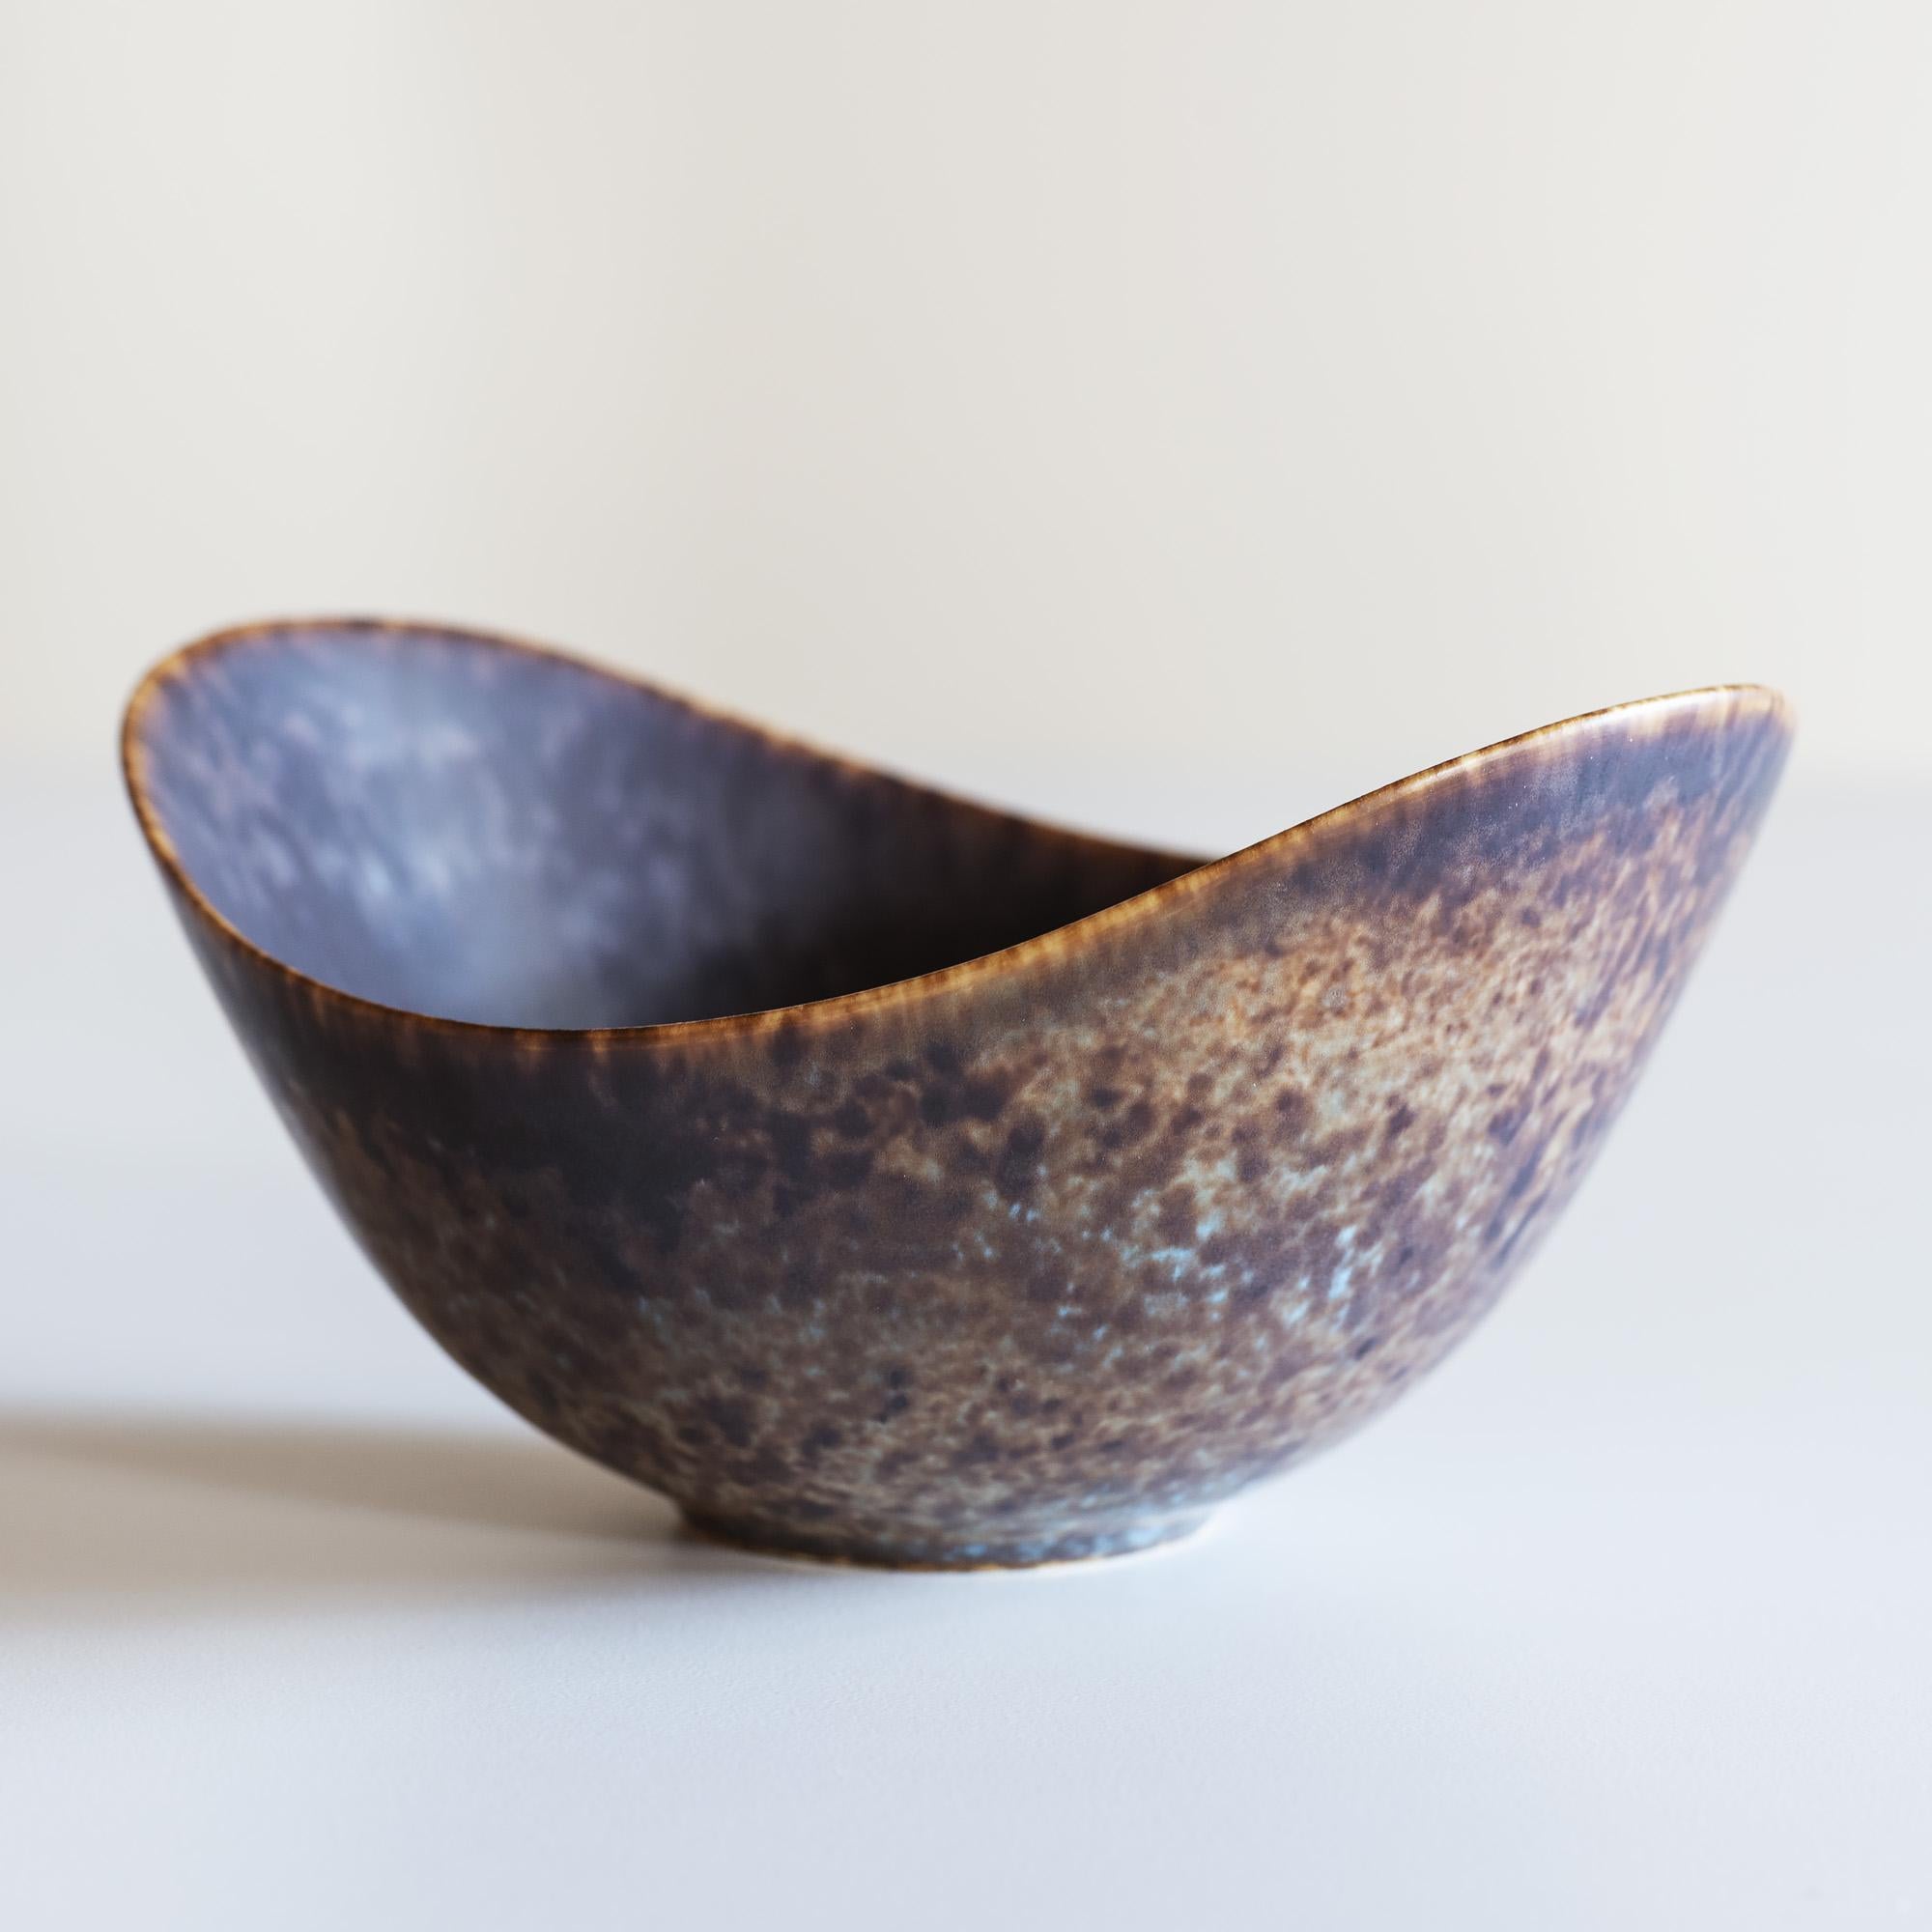 Single Gunnar Nylund stoneware vessel for Rörstrand, Sweden. Matte hares fur glaze in shades of brown with blue accents.
  